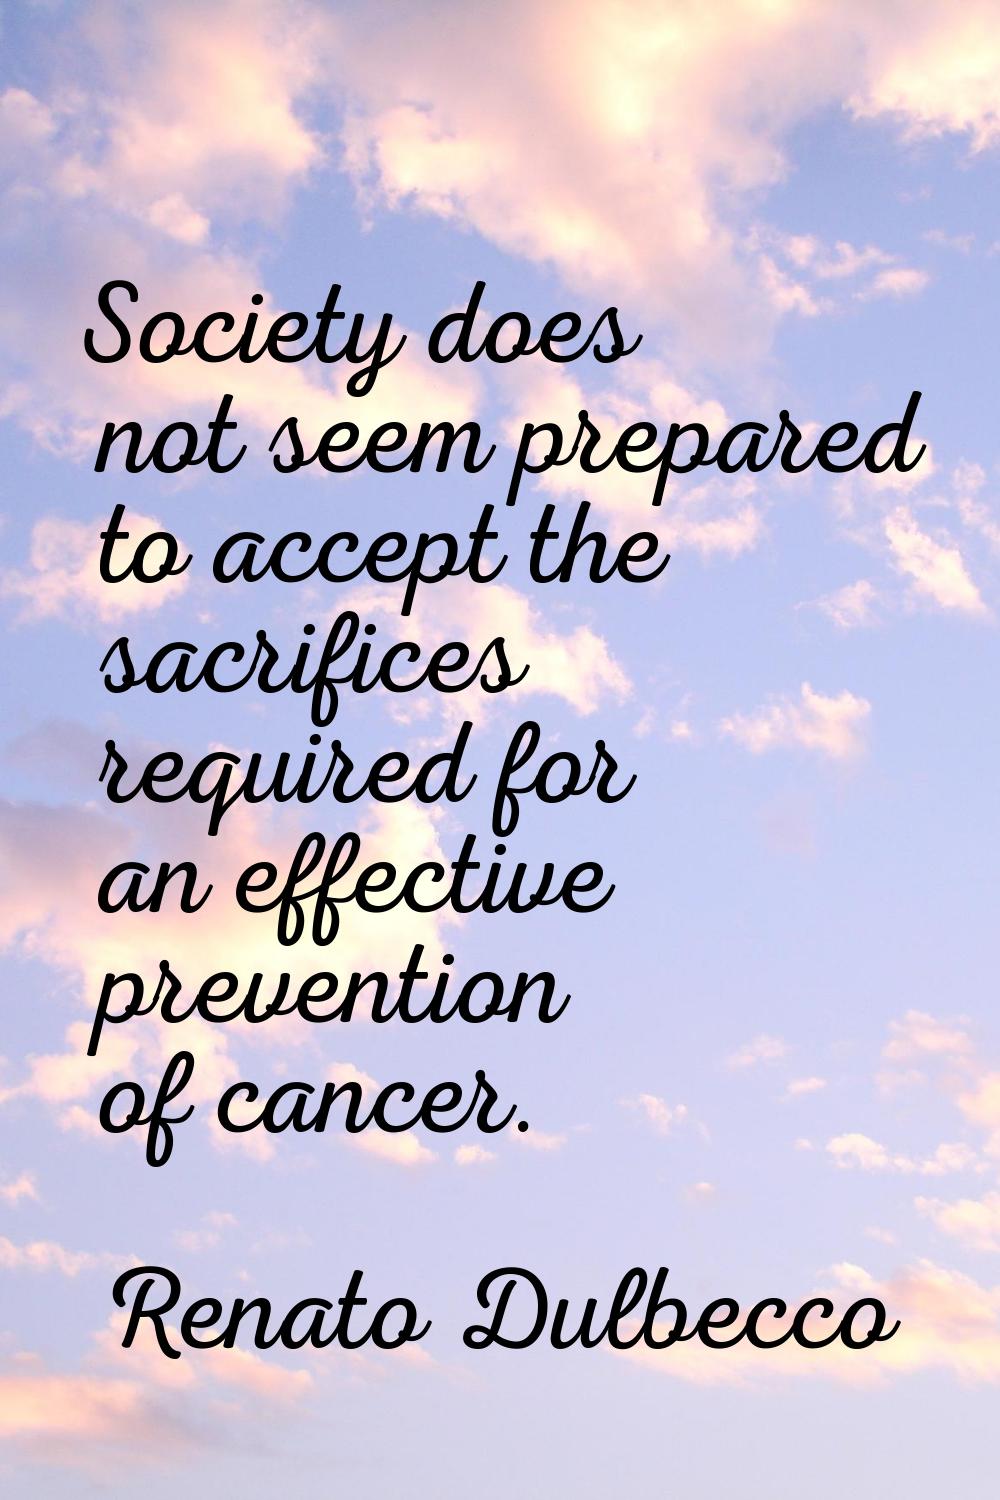 Society does not seem prepared to accept the sacrifices required for an effective prevention of can